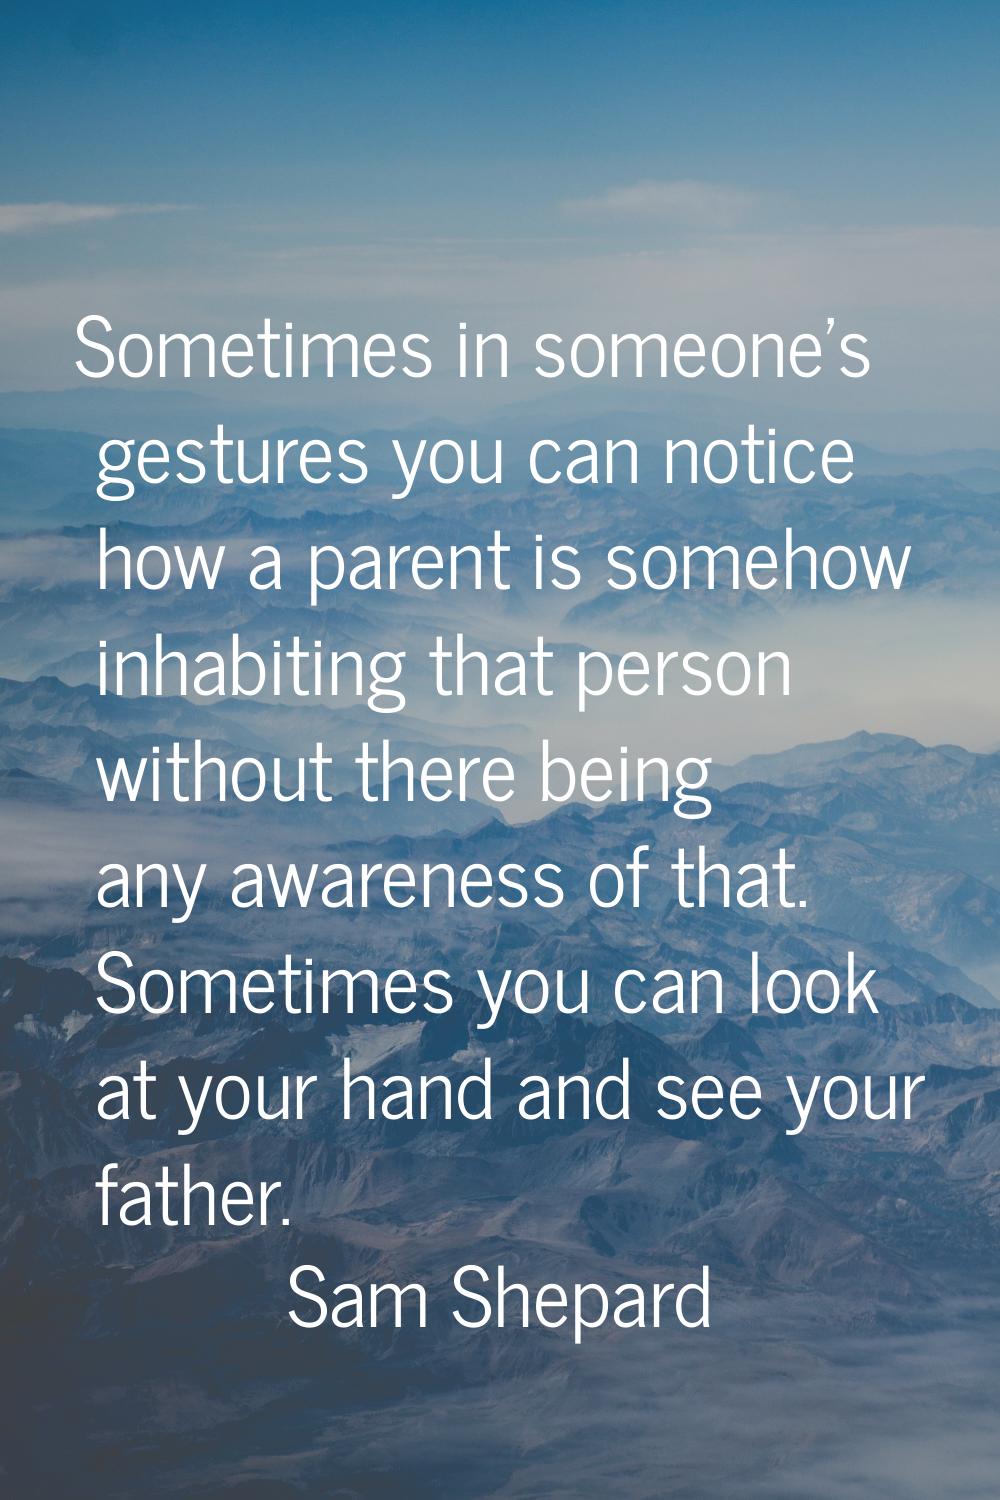 Sometimes in someone's gestures you can notice how a parent is somehow inhabiting that person witho